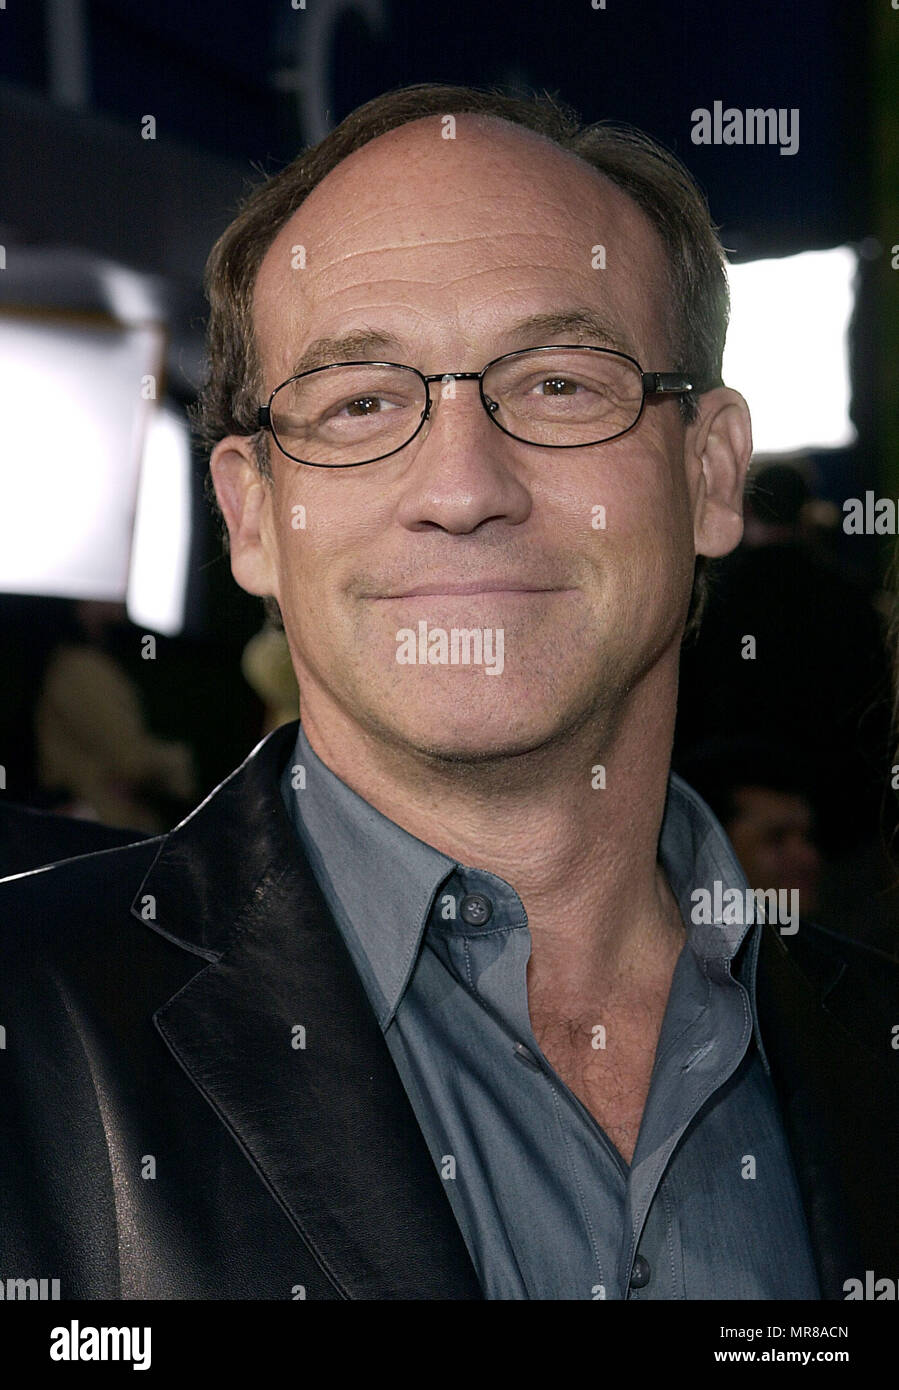 The director Chuck Russell arriving at the premiere of Scorpion King at the Universal Amphitheatre in Los angeles. April 17, 2002.RussellChuck director30 Red Carpet Event, Vertical, USA, Film Industry, Celebrities,  Photography, Bestof, Arts Culture and Entertainment, Topix Celebrities fashion /  Vertical, Best of, Event in Hollywood Life - California,  Red Carpet and backstage, USA, Film Industry, Celebrities,  movie celebrities, TV celebrities, Music celebrities, Photography, Bestof, Arts Culture and Entertainment,  Topix, headshot, vertical, one person,, from the year , 2002, inquiry tsuni@ Stock Photo